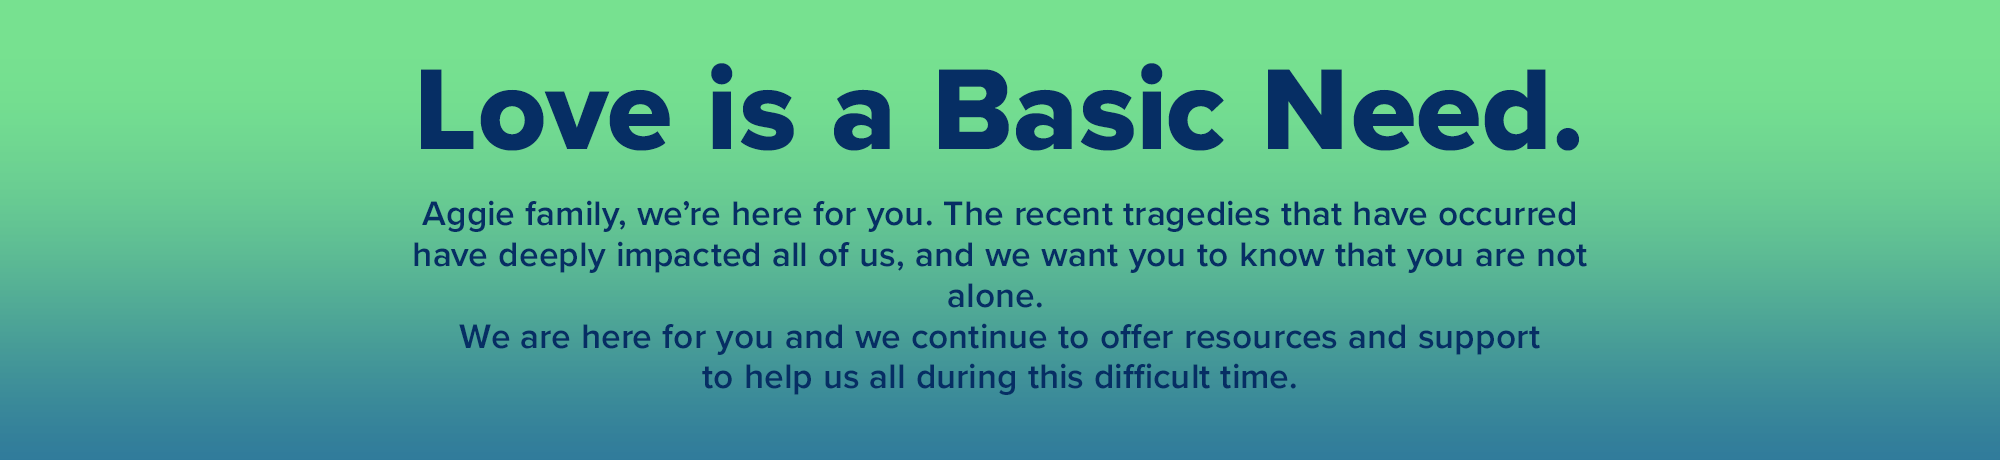 Love is a basic need. Aggie Family, we're here for you. The recent tragedies that have occurred have deeply impacted all of us, and we want you to know that you are not alone. 